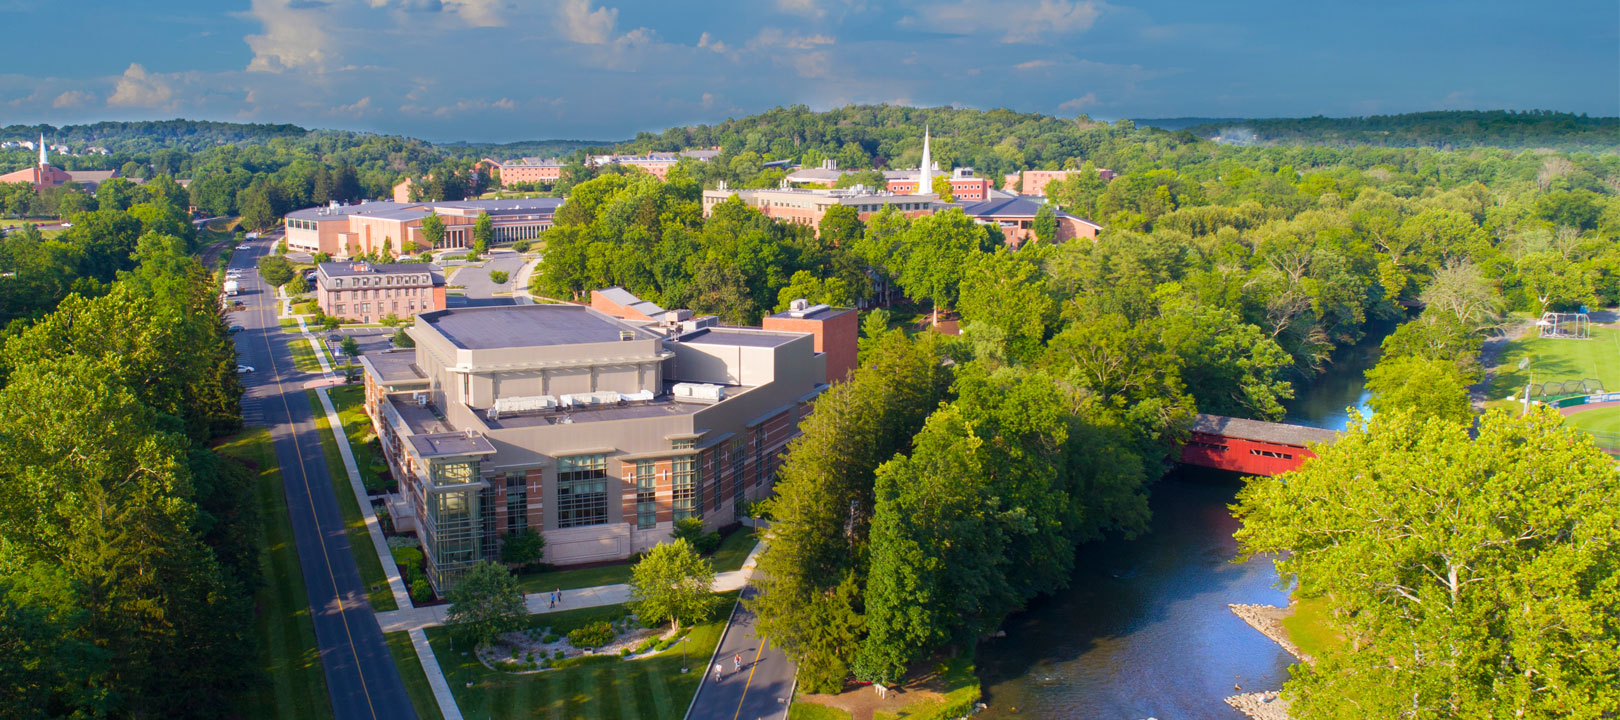 Office of the Provost Campus_aerial_2020.jpg